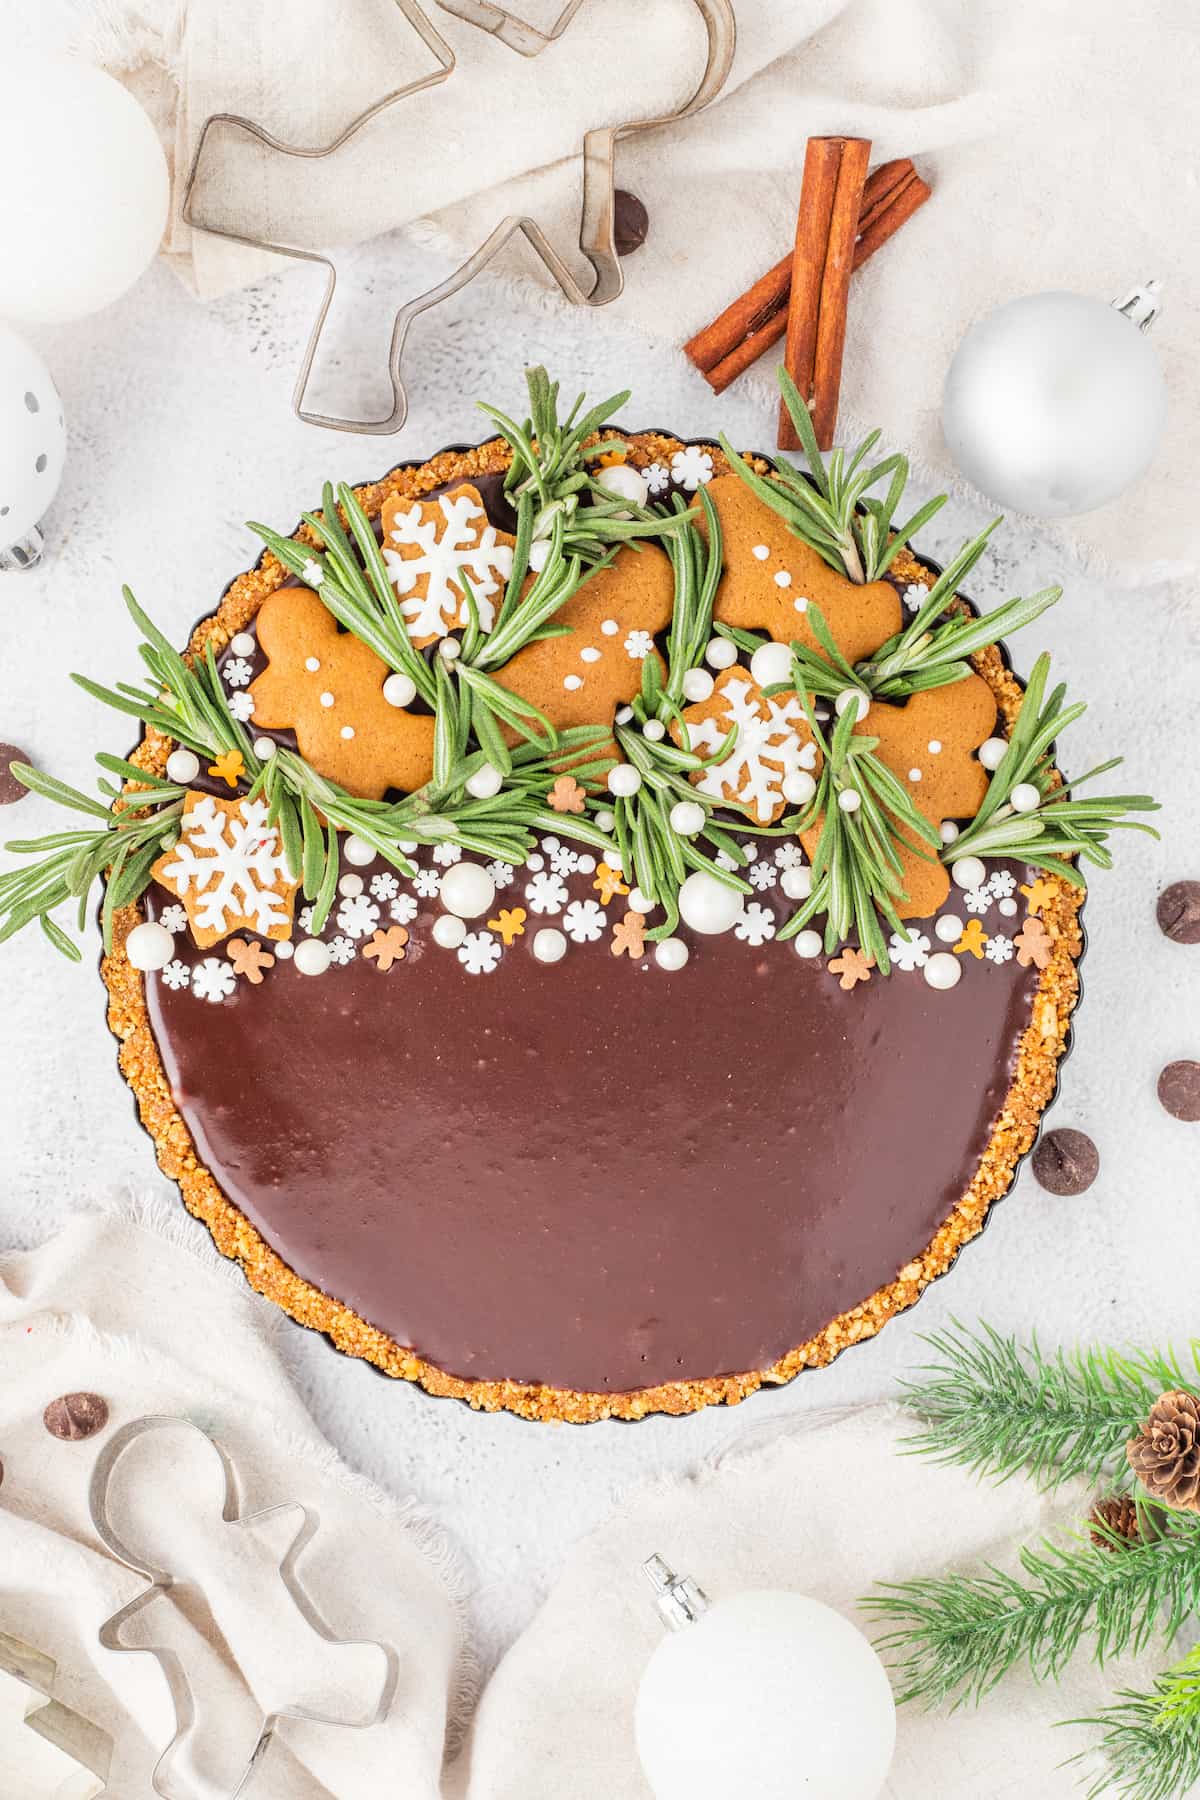 A gingerbread chocolate tart decorated with ornaments.